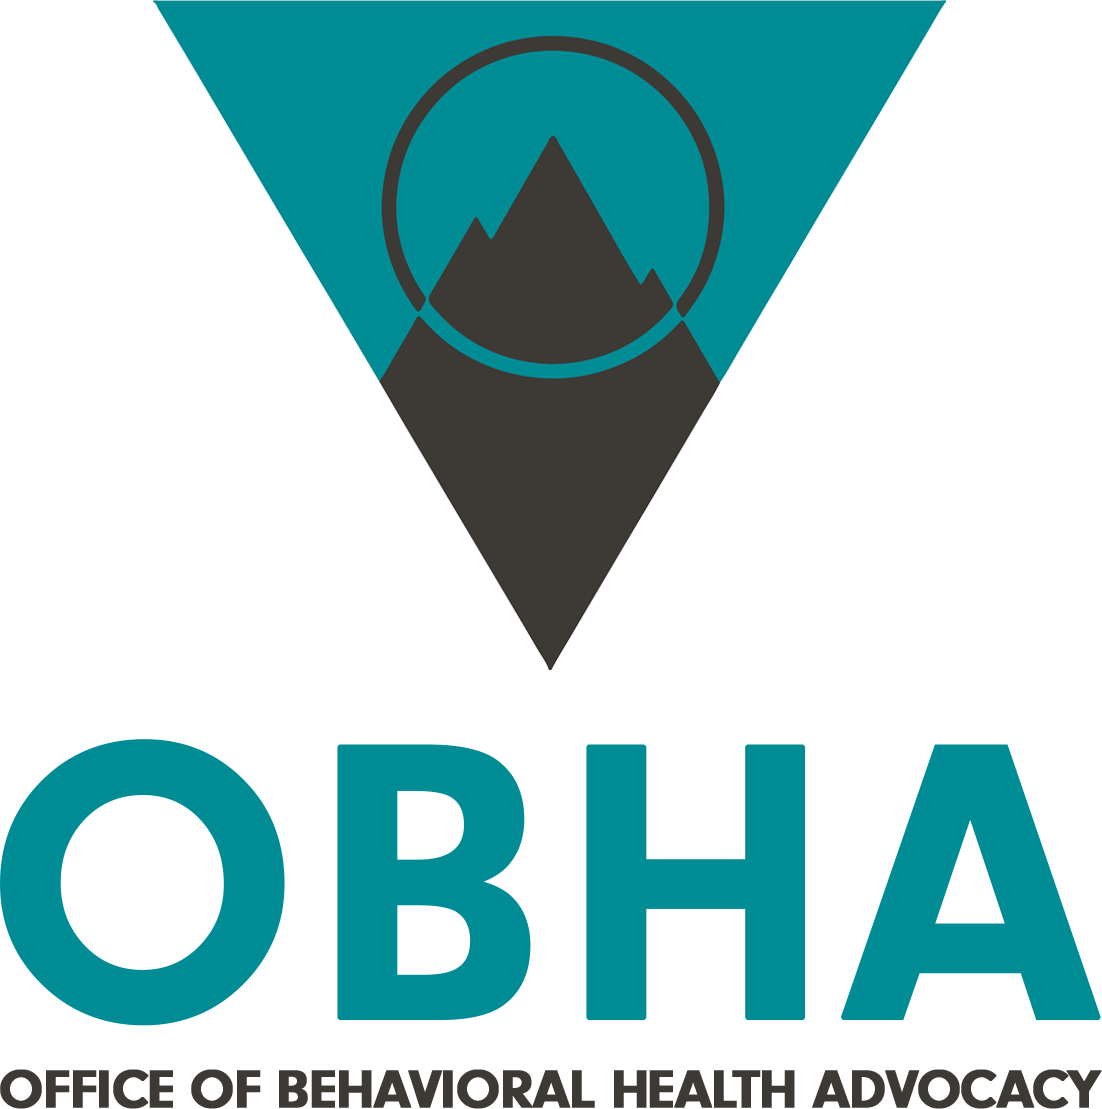 Office of Behavioral Health Advocacy